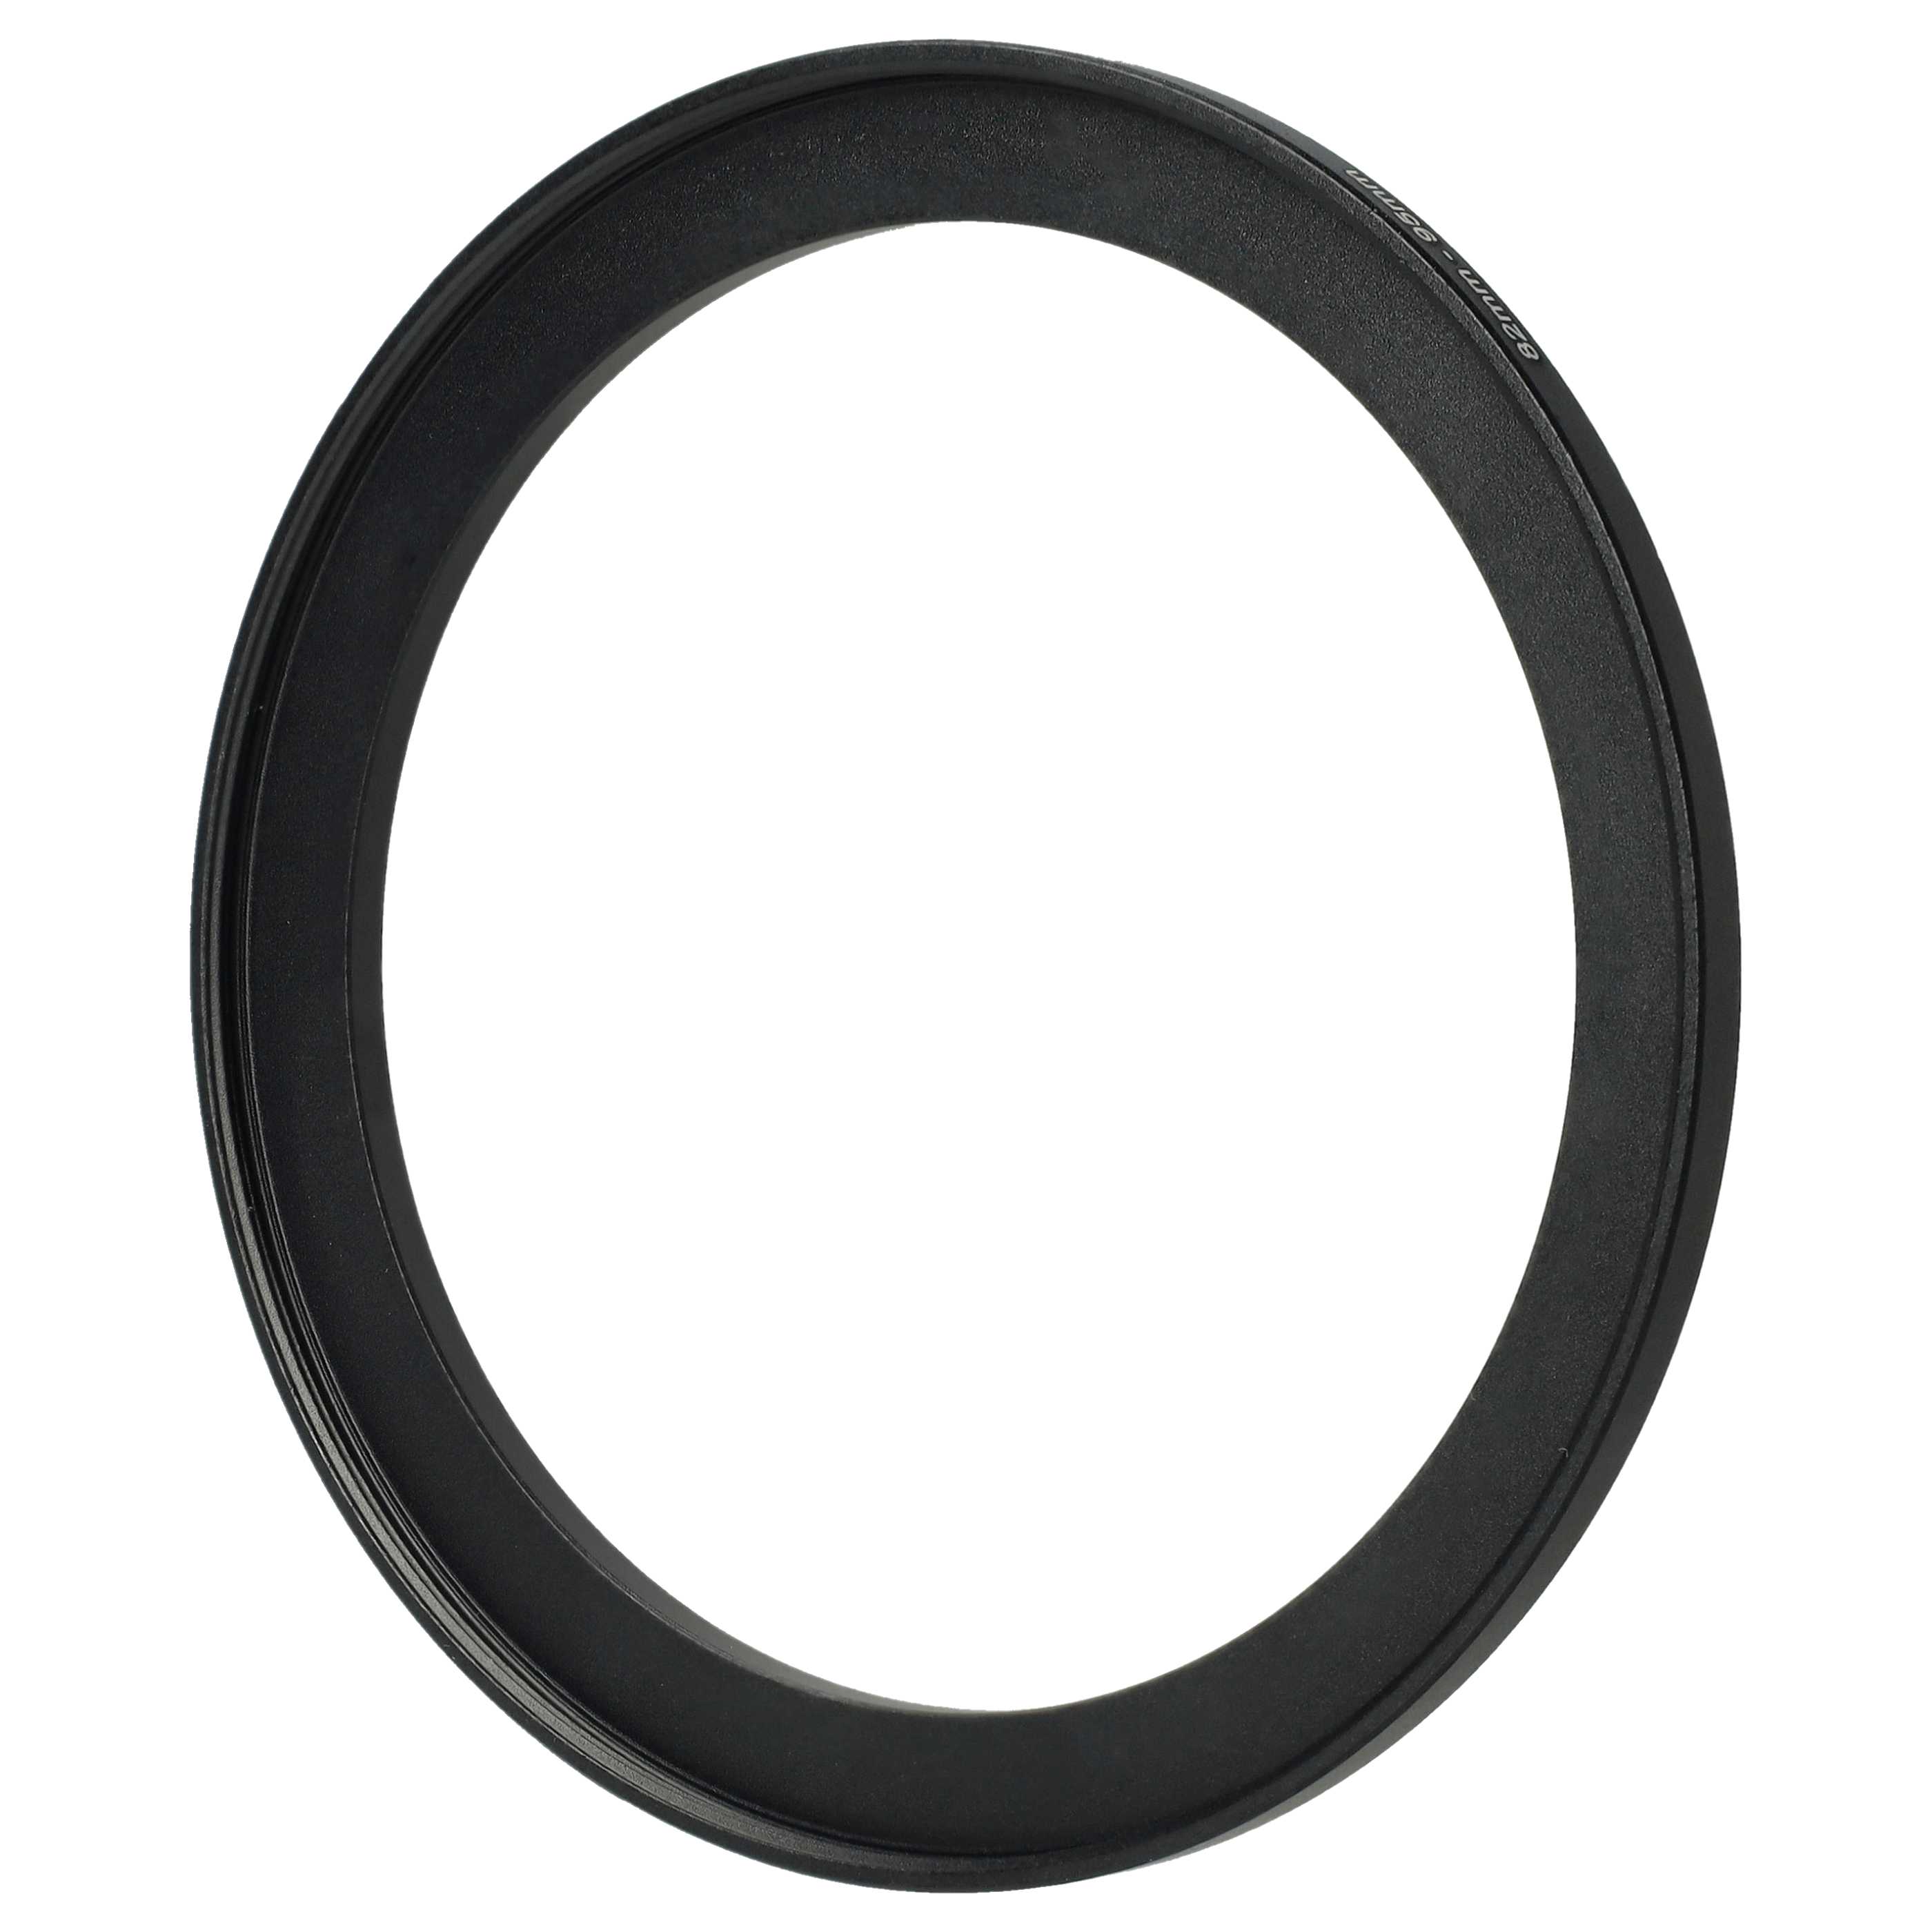 Step-Up Ring Adapter of 82 mm to 95 mmfor various Camera Lens - Filter Adapter